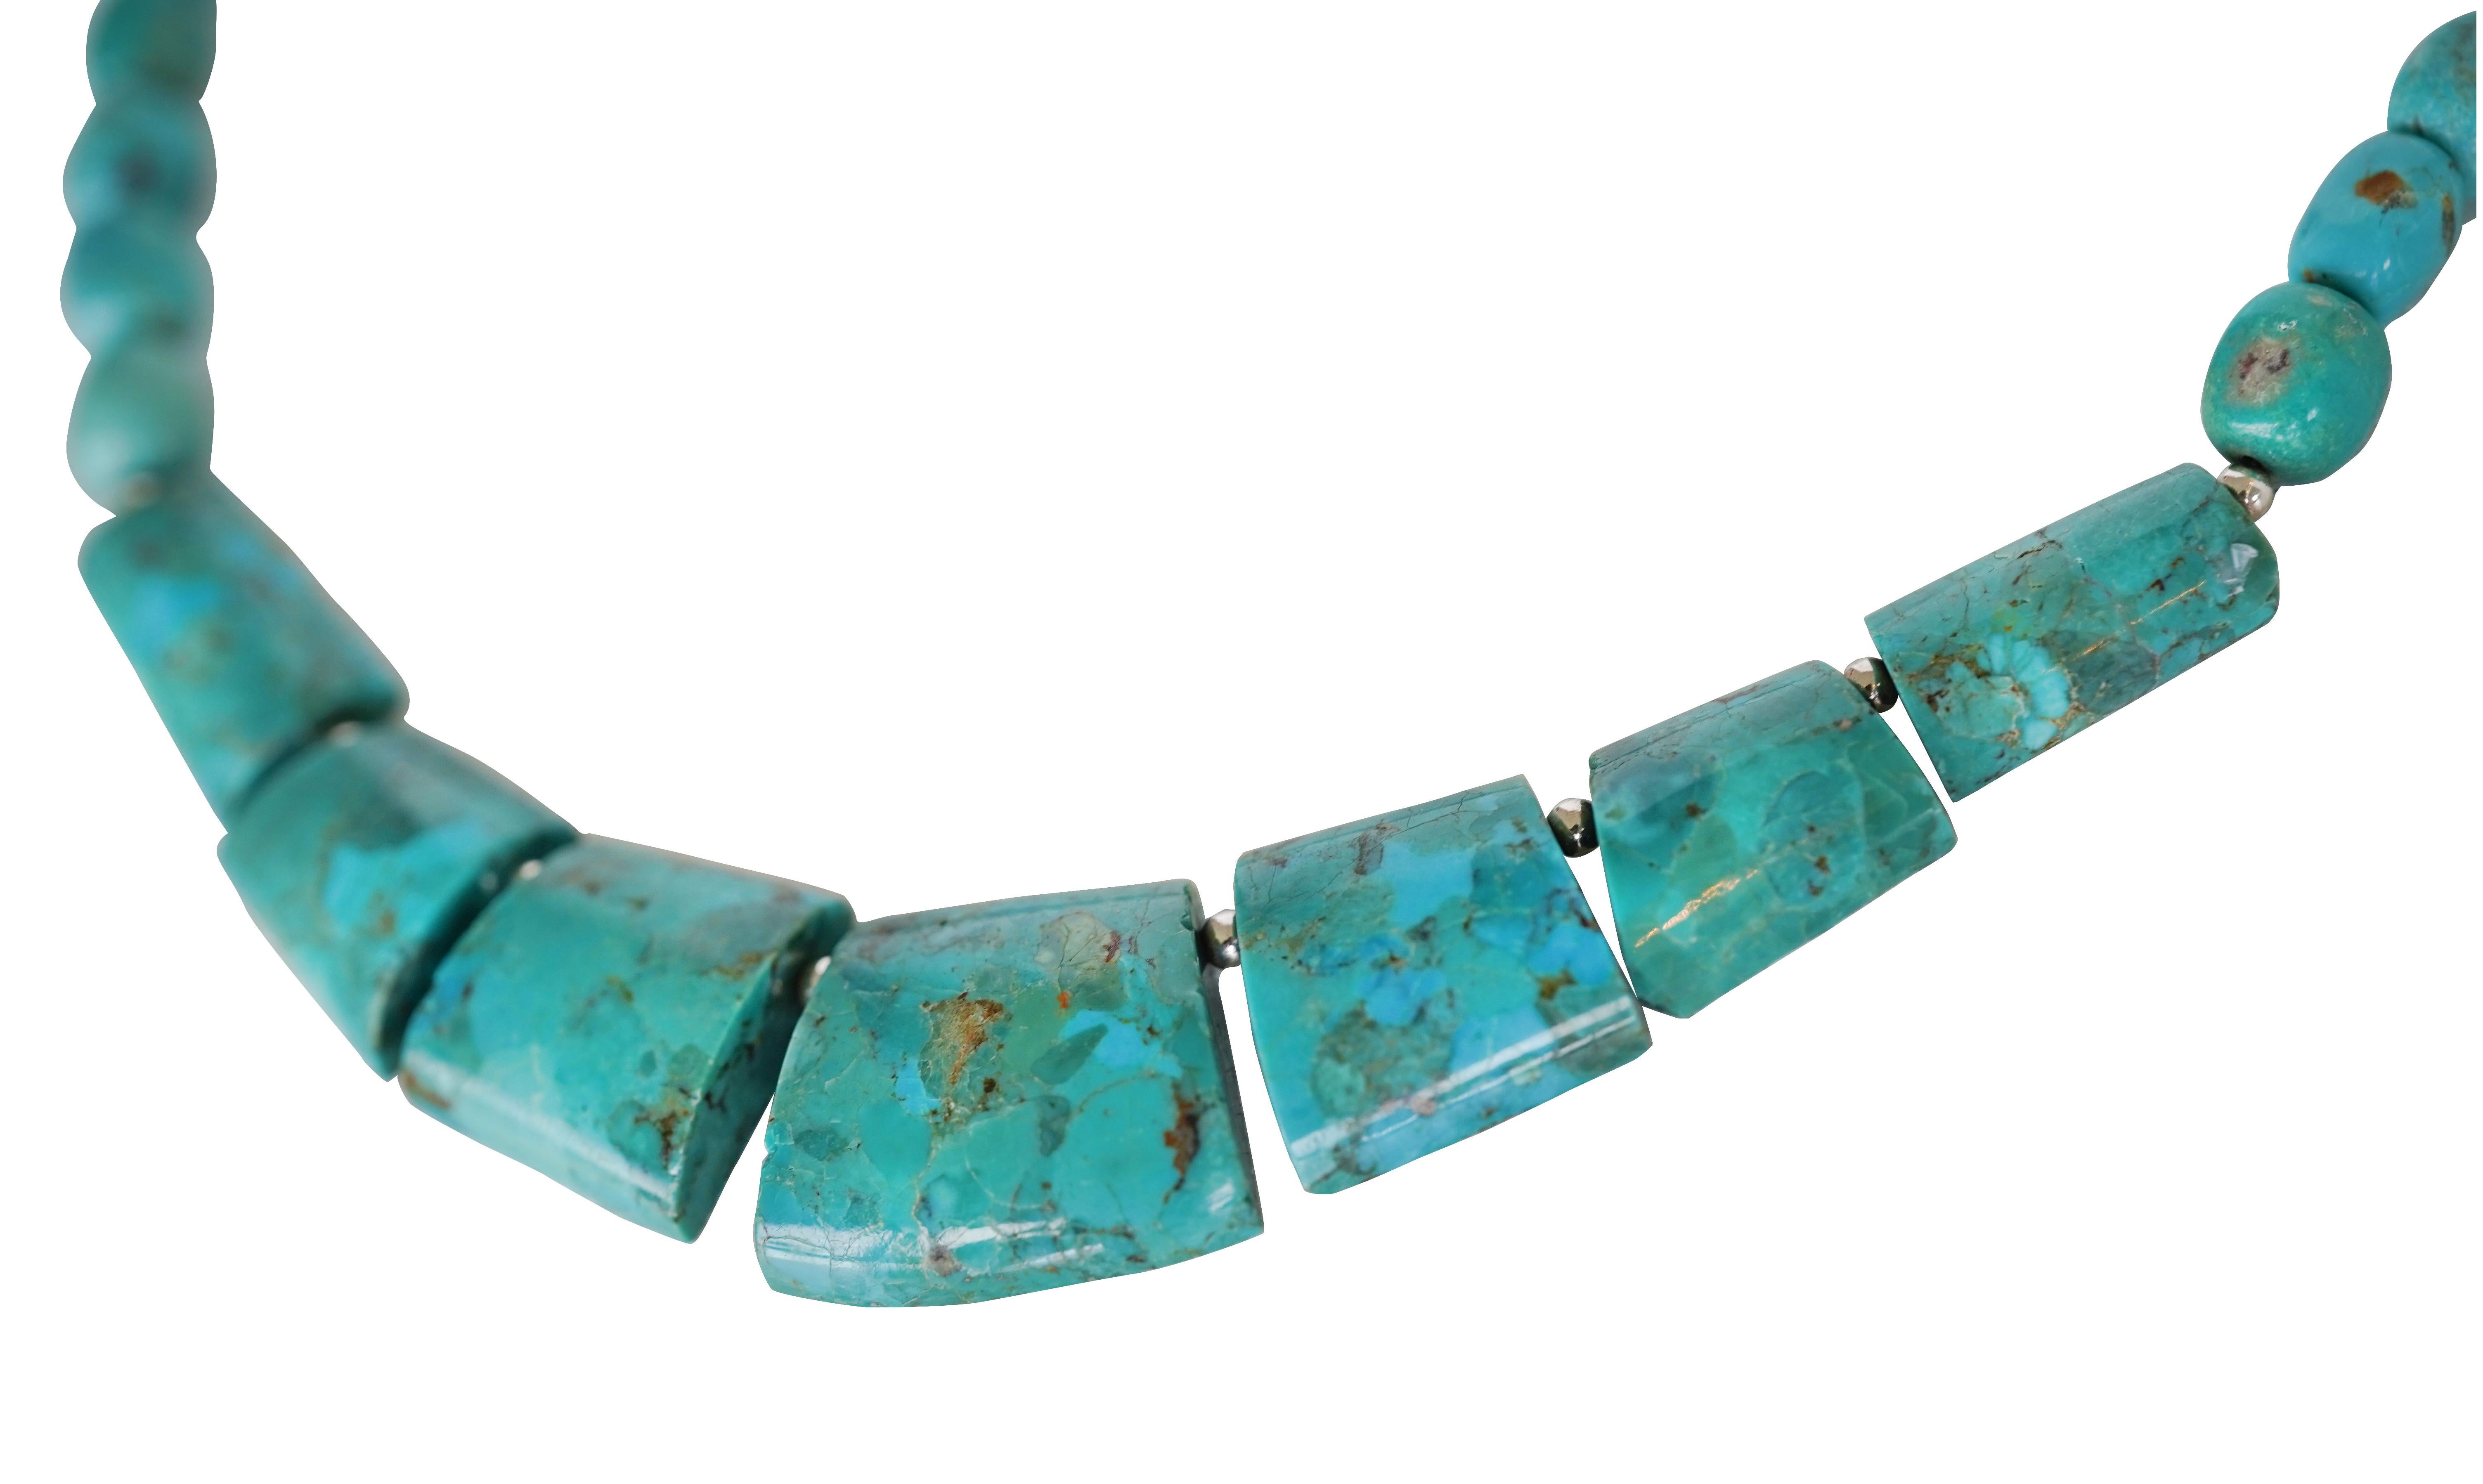 Natural flat blue turquoise bead sterling silver necklace. A total of 7 flat and 30 oval turquoise stones were used to make this necklace.
Necklace length: 19.5 inches/49.5 cm.
Maximum dimensions: 22.43 mm long x 25.55 mm wide, thickness approx. 6